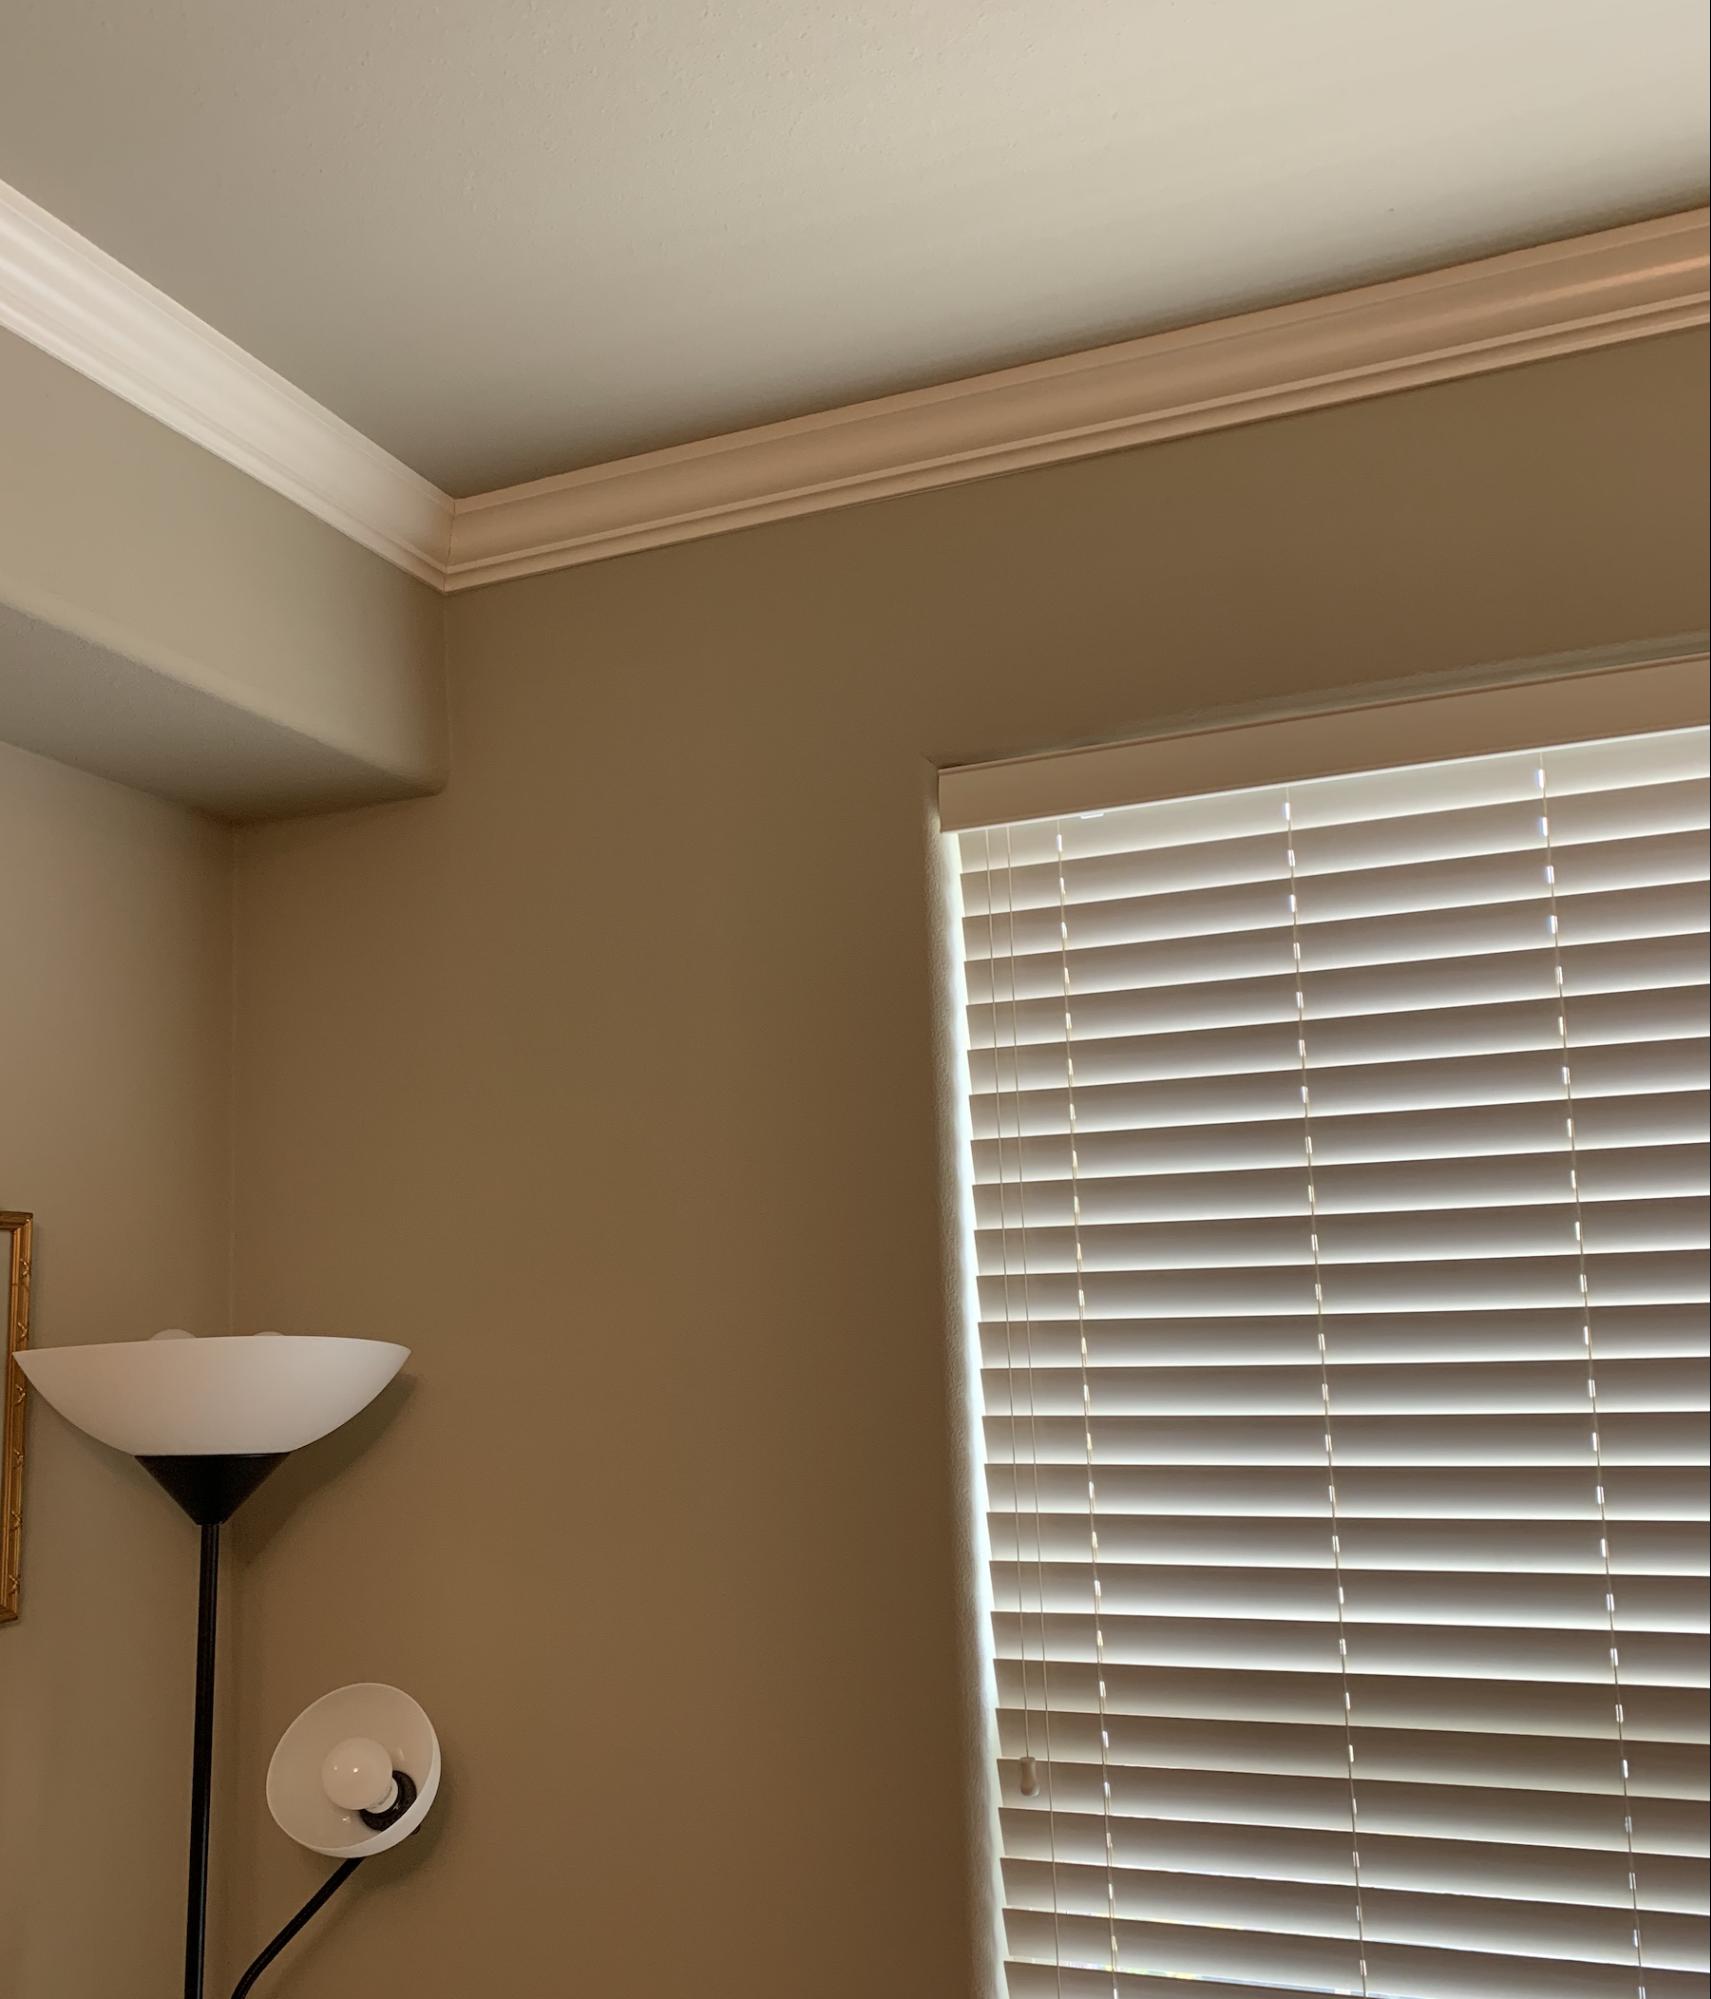 Crown molding on the perimeter of a ceiling.